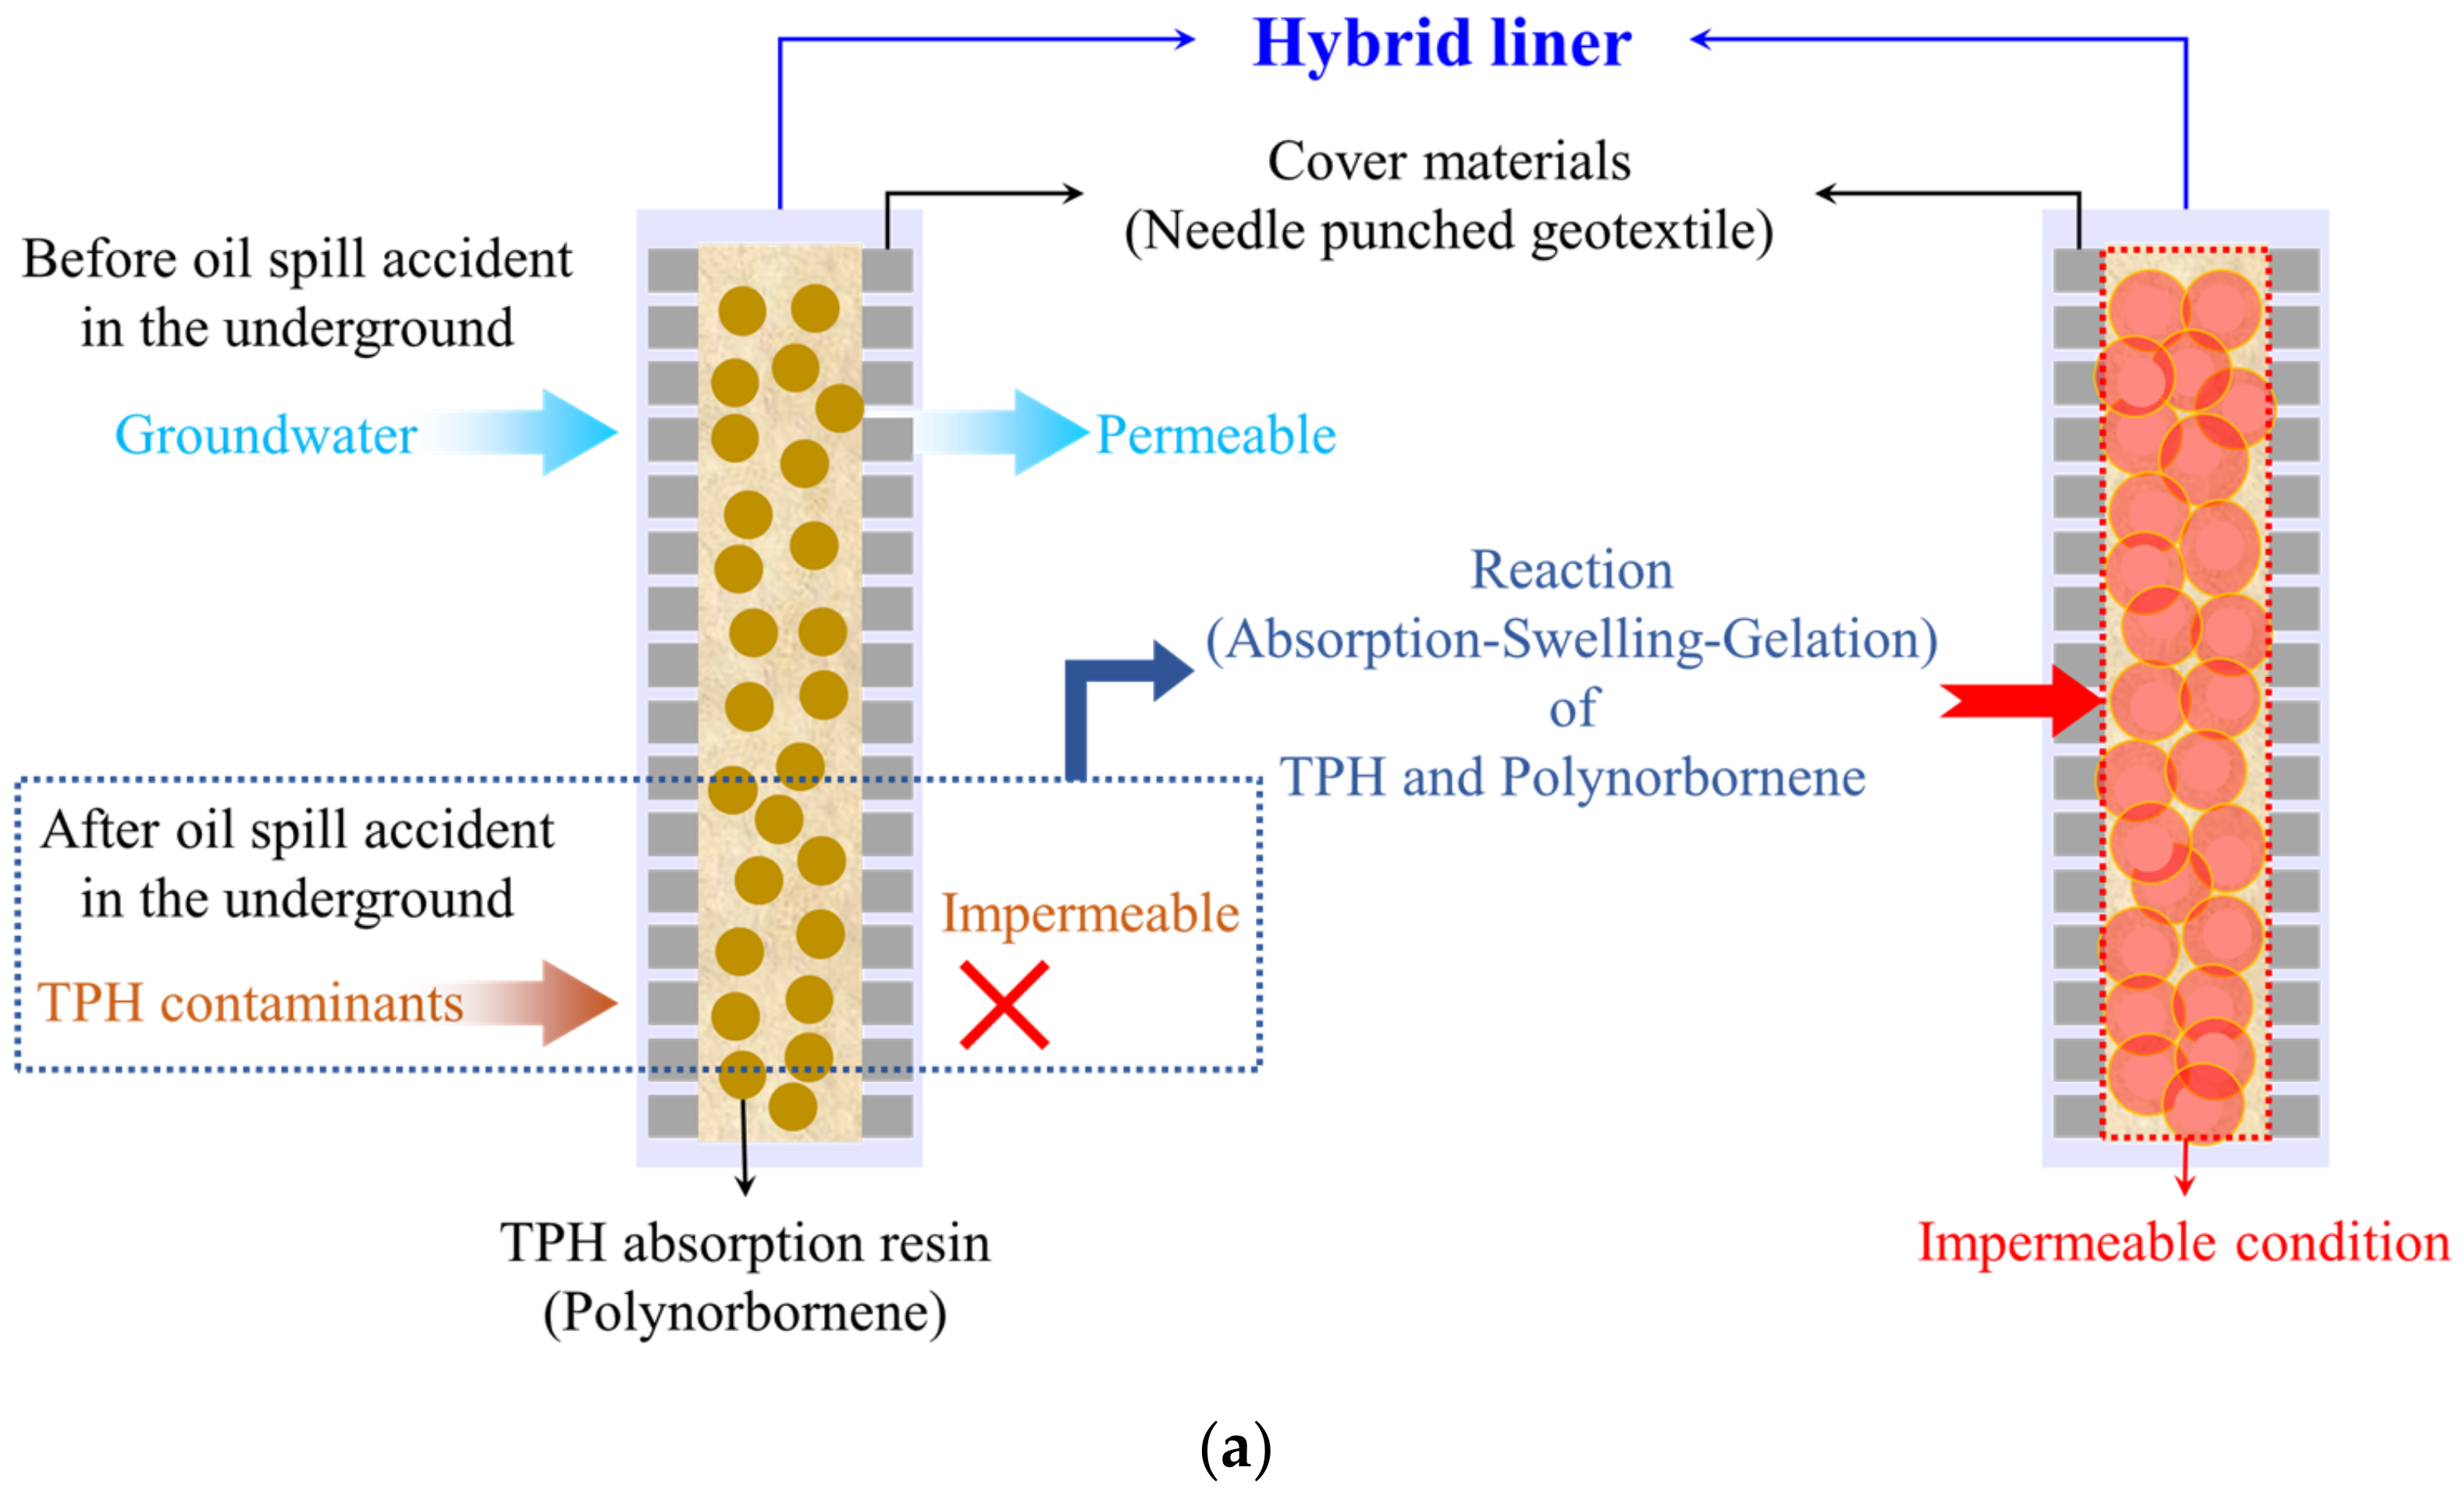 IJERPH | Free Full-Text | Simulation on the Permeability Evaluation of a  Hybrid Liner for the Prevention of Contaminant Diffusion in Soils  Contaminated with Total Petroleum Hydrocarbon